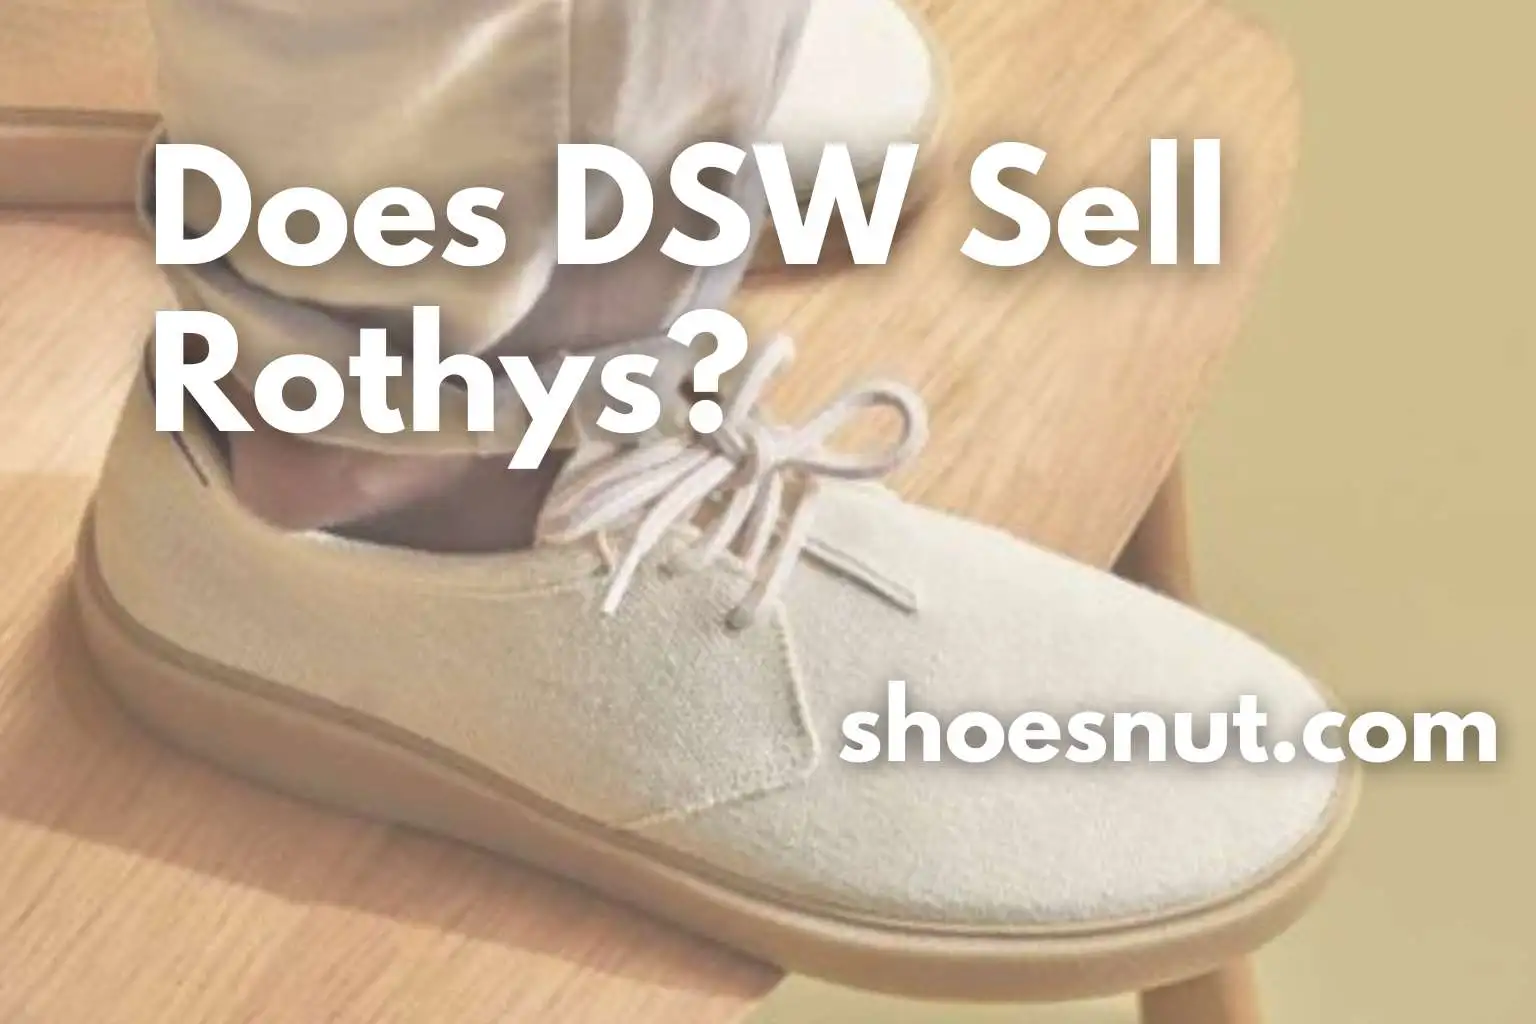 Does DSW Sell Rothys?